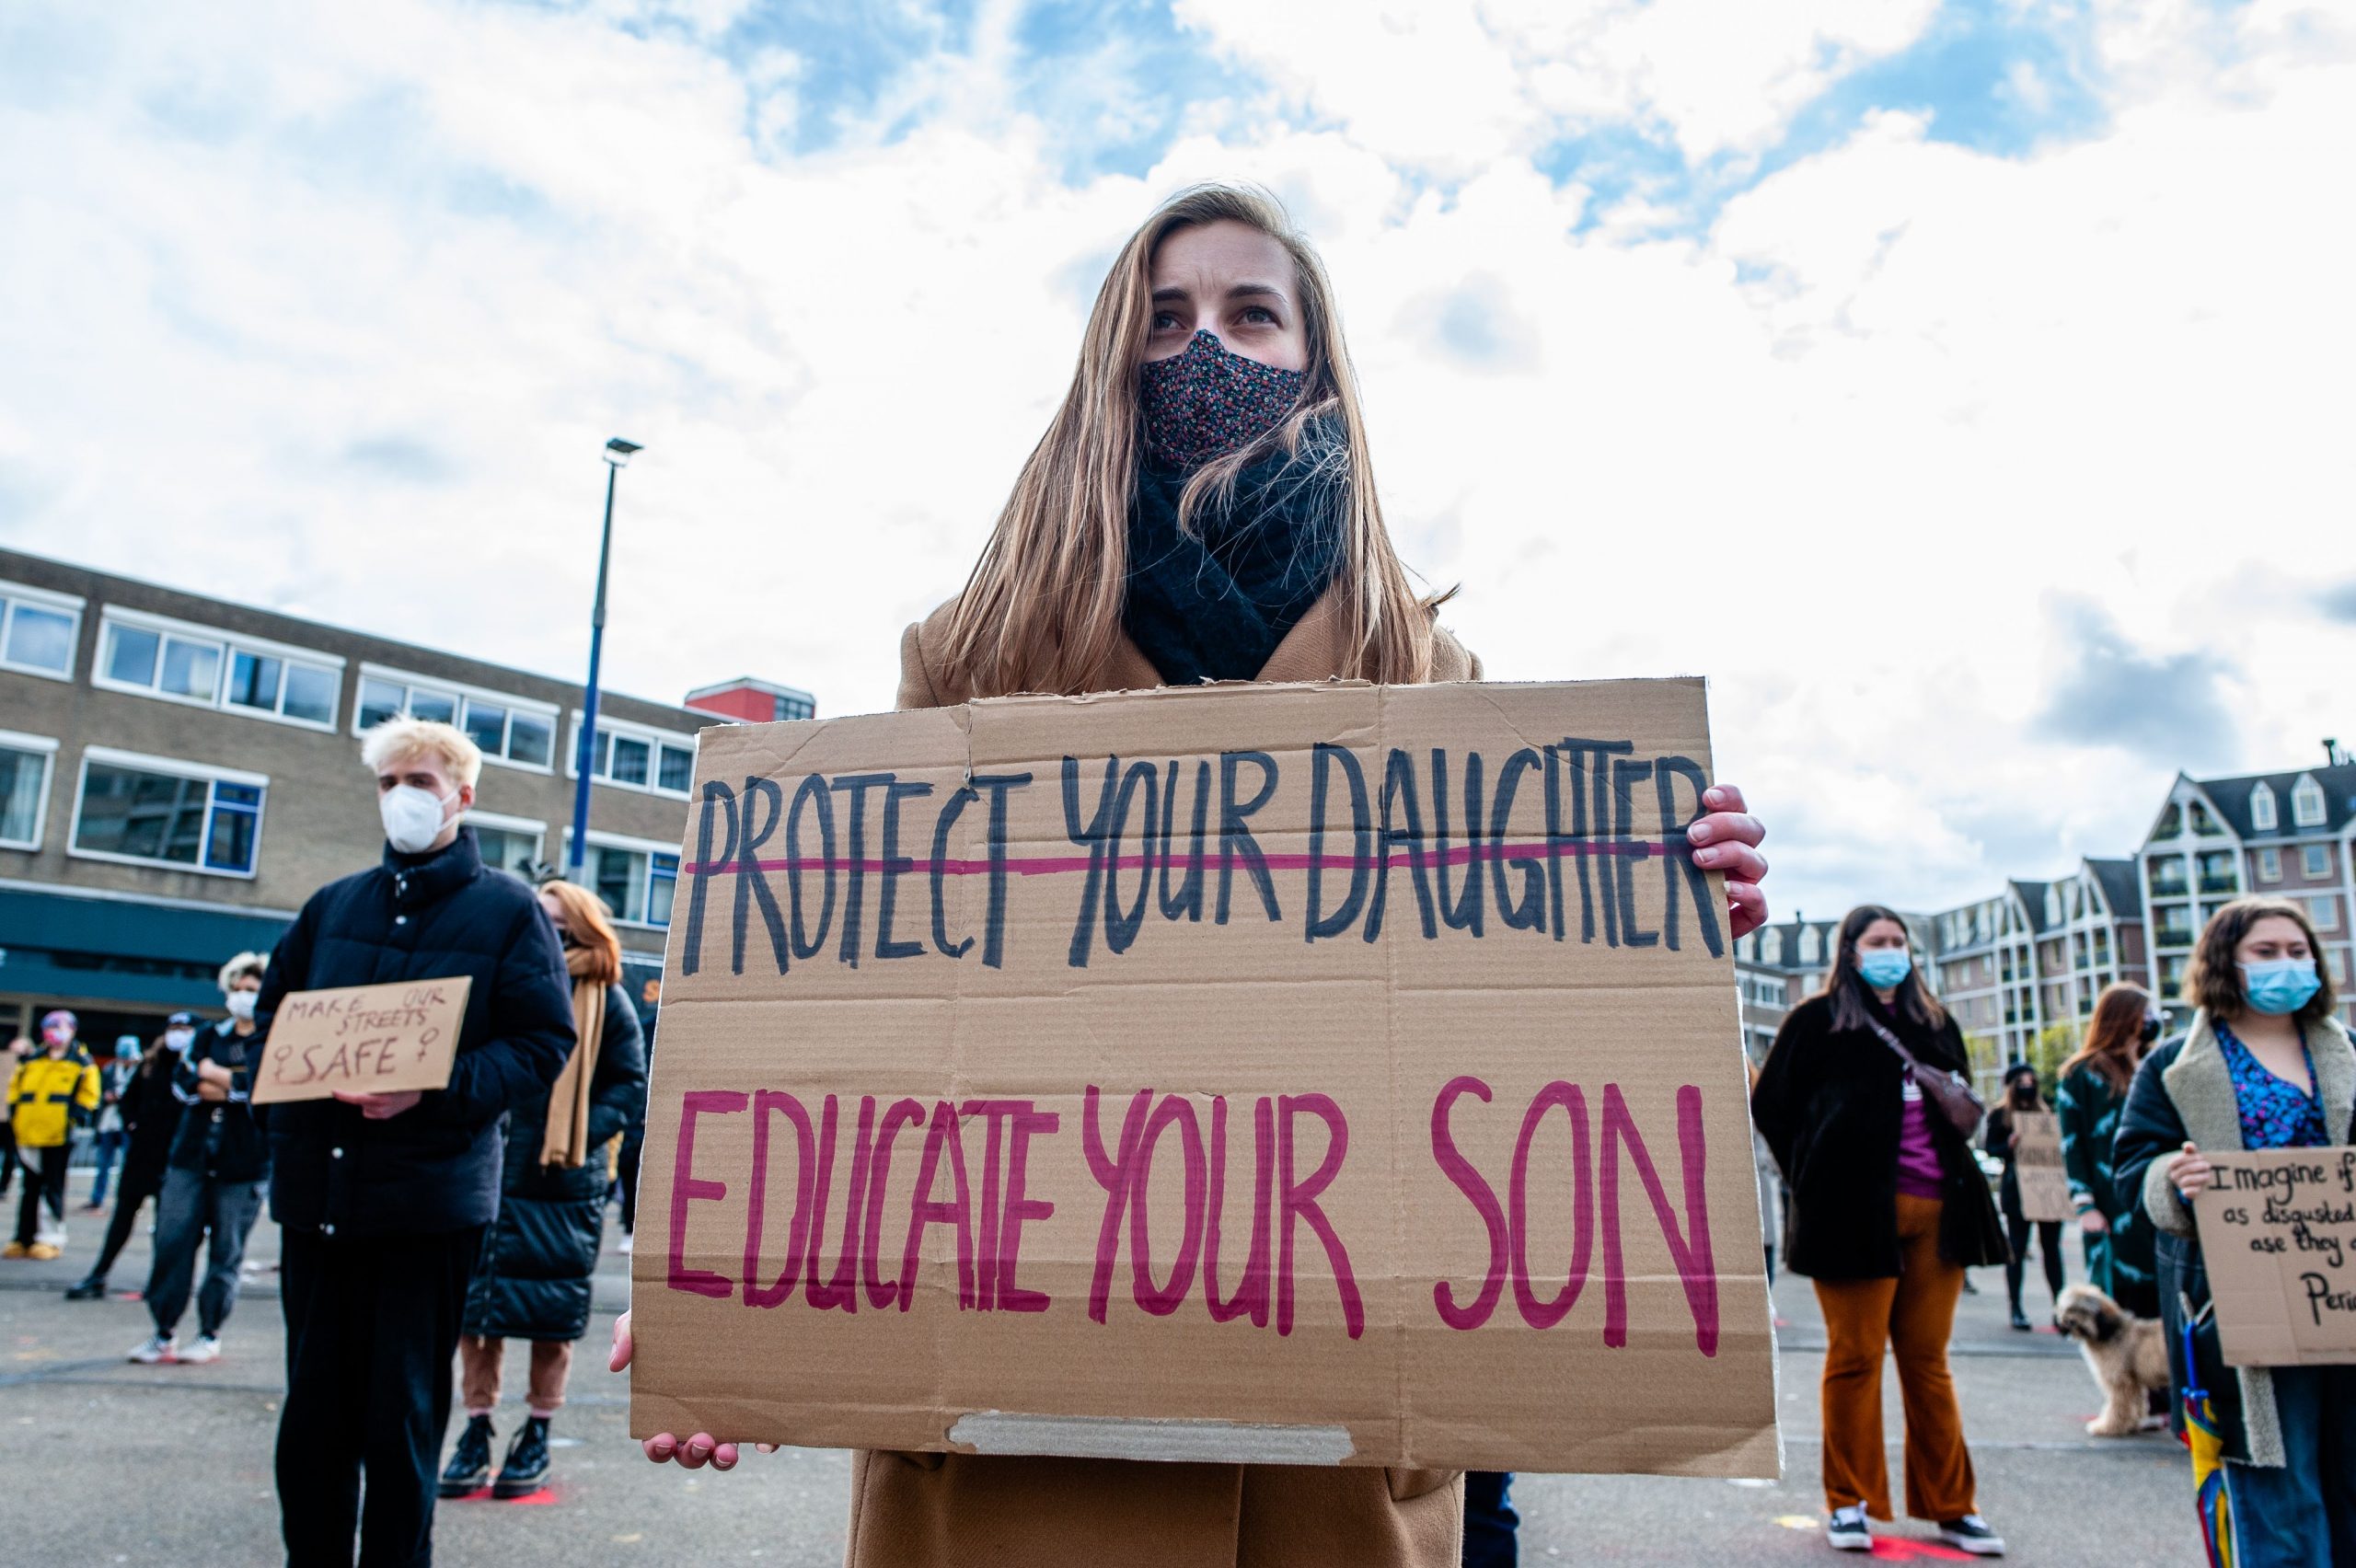 Protest sign reading"Educate your son" with "Protect your daughter" crossed out.